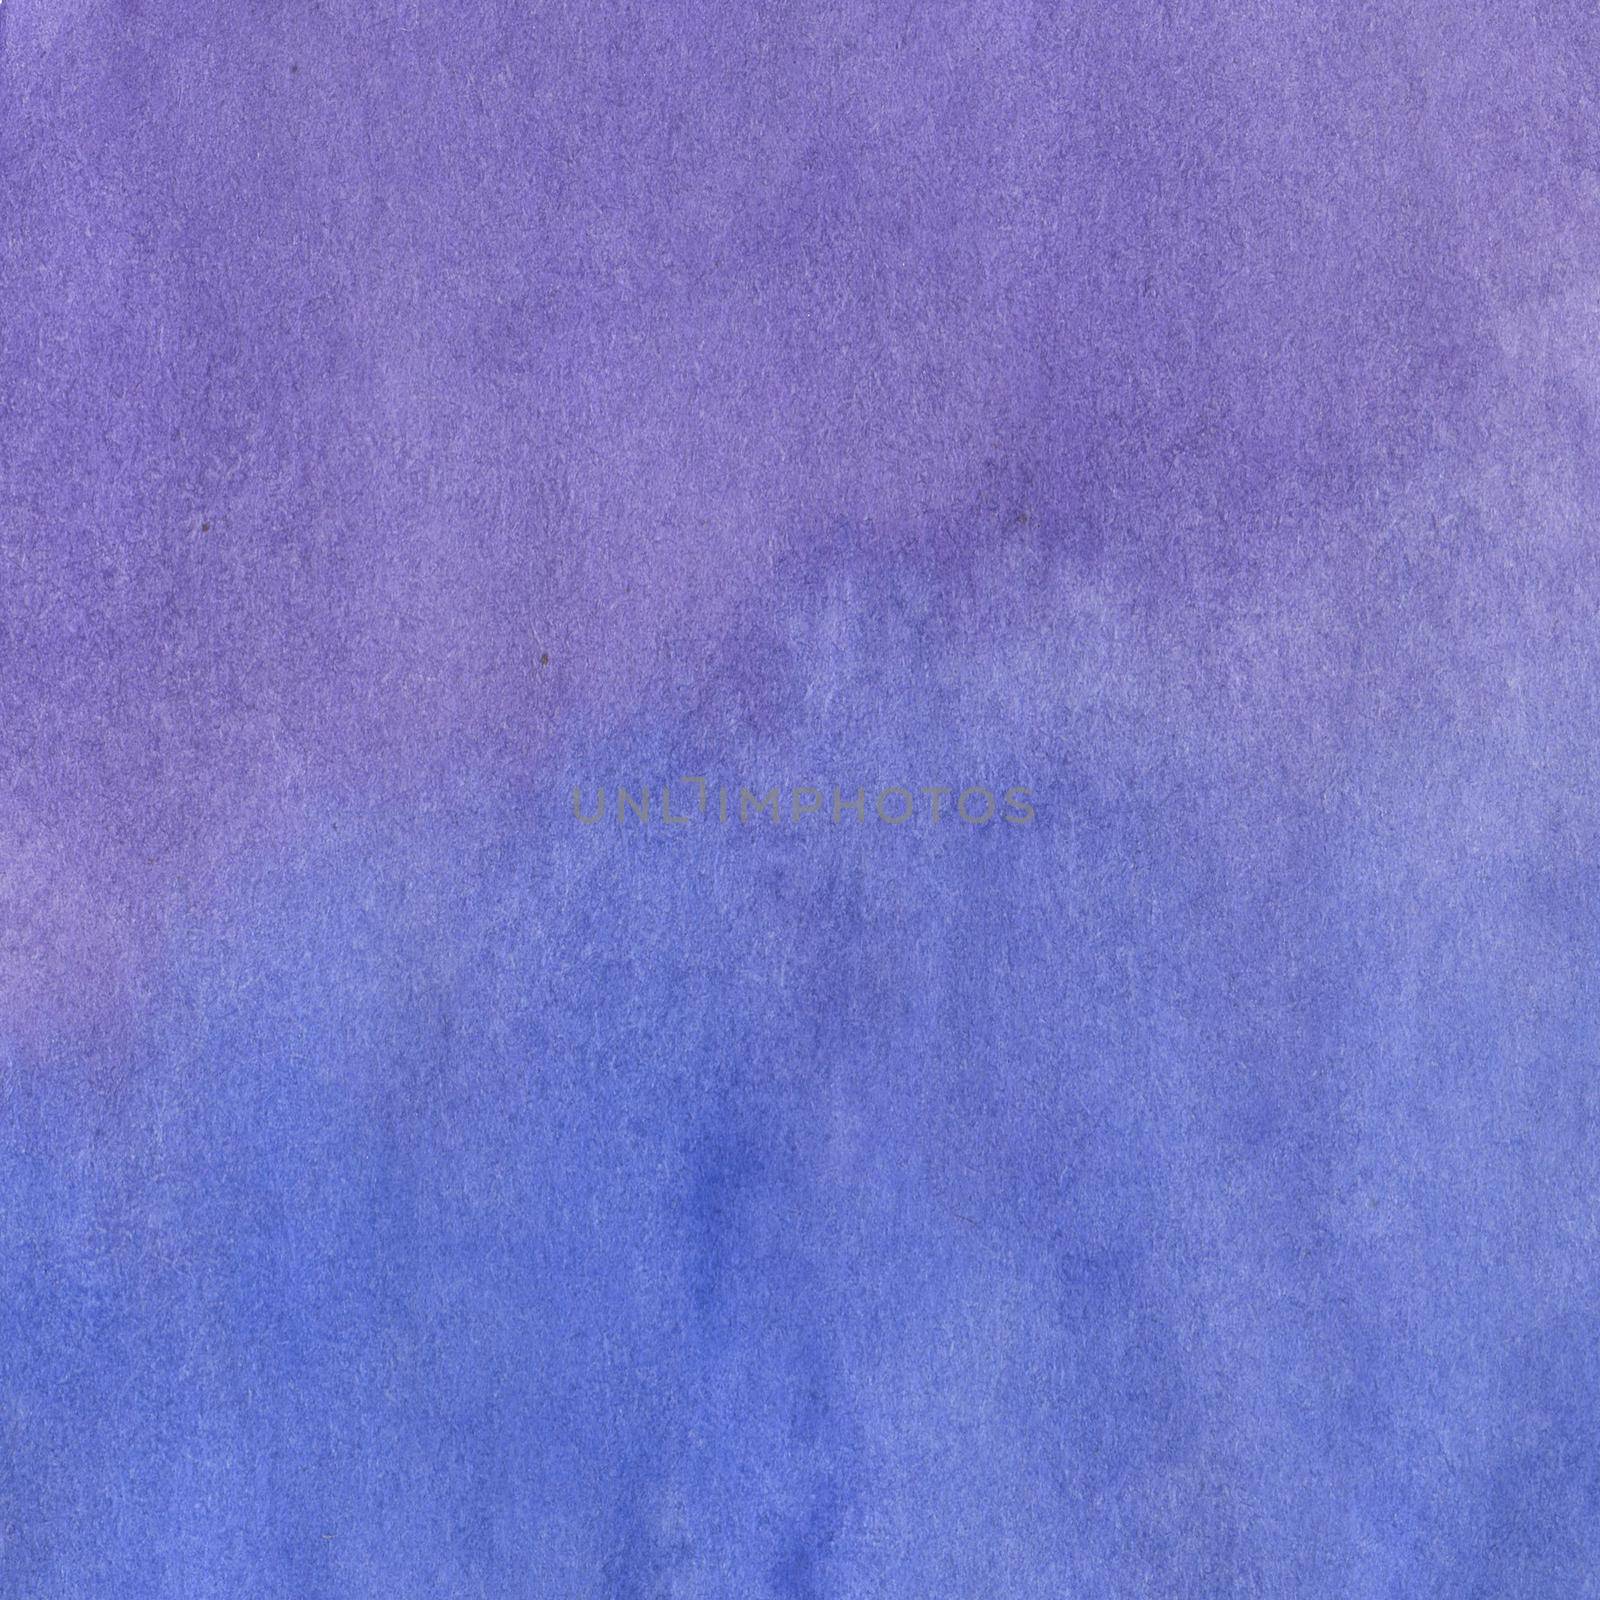 Blue and Purple Hand Drawn Watercolor Abstract Background. Watercolors Paint Decorative Texture Backdrop.